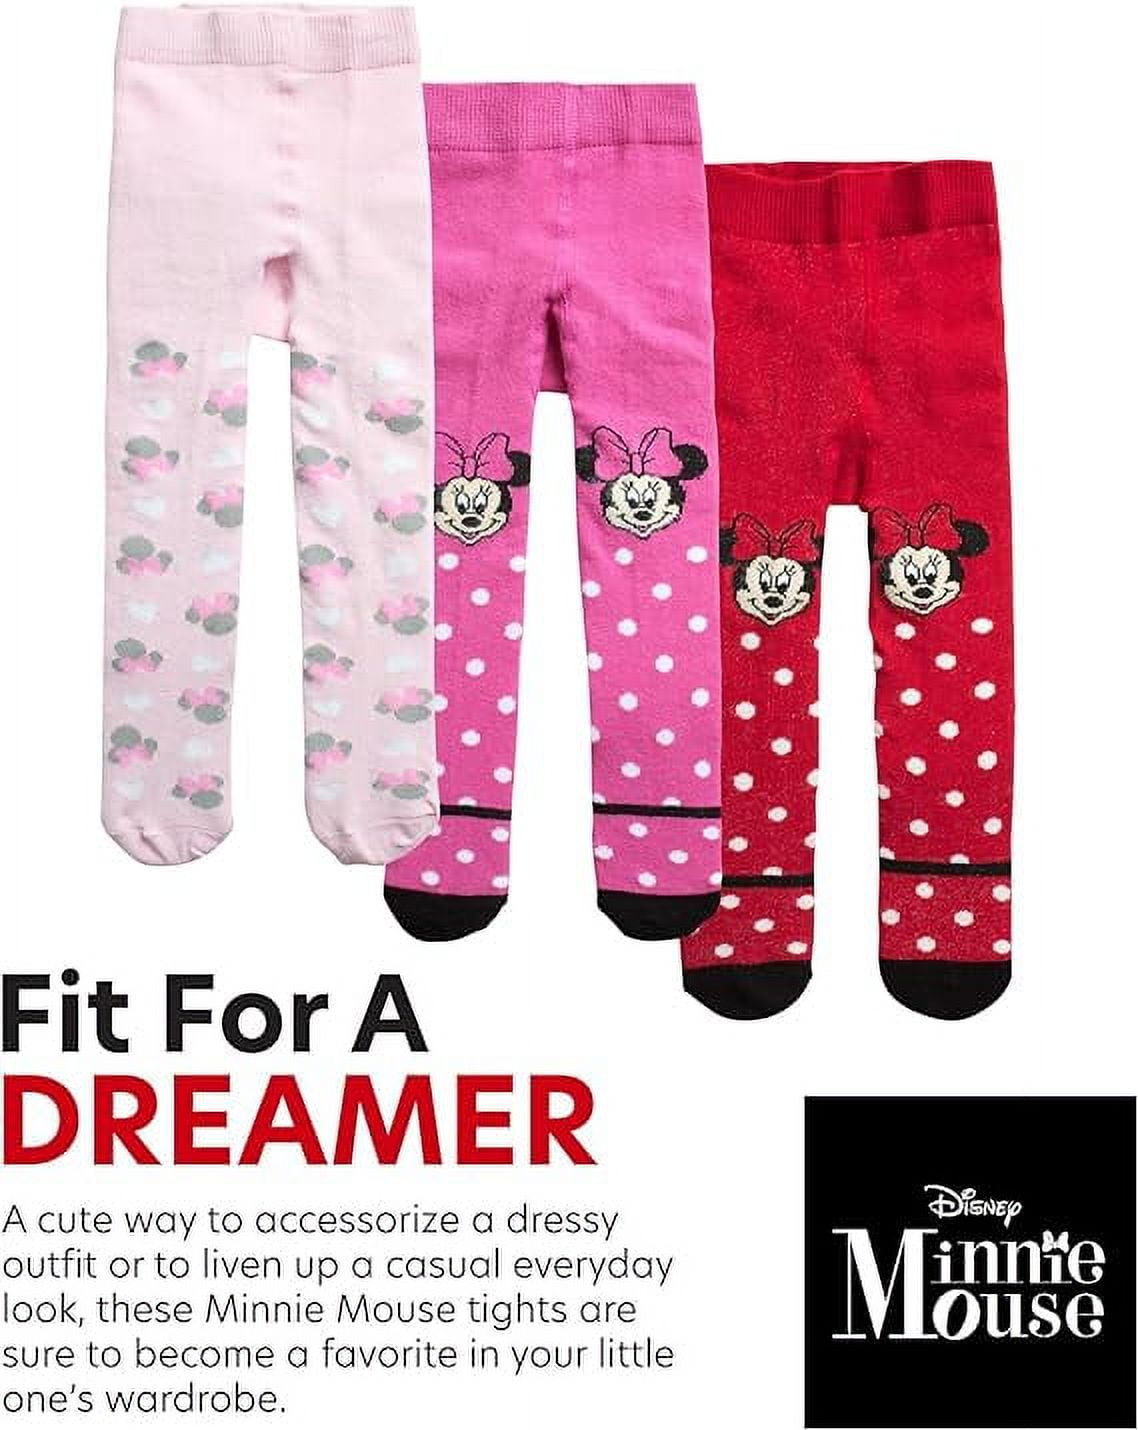 Minnie Mouse leggings Color red - SINSAY - WK232-33X